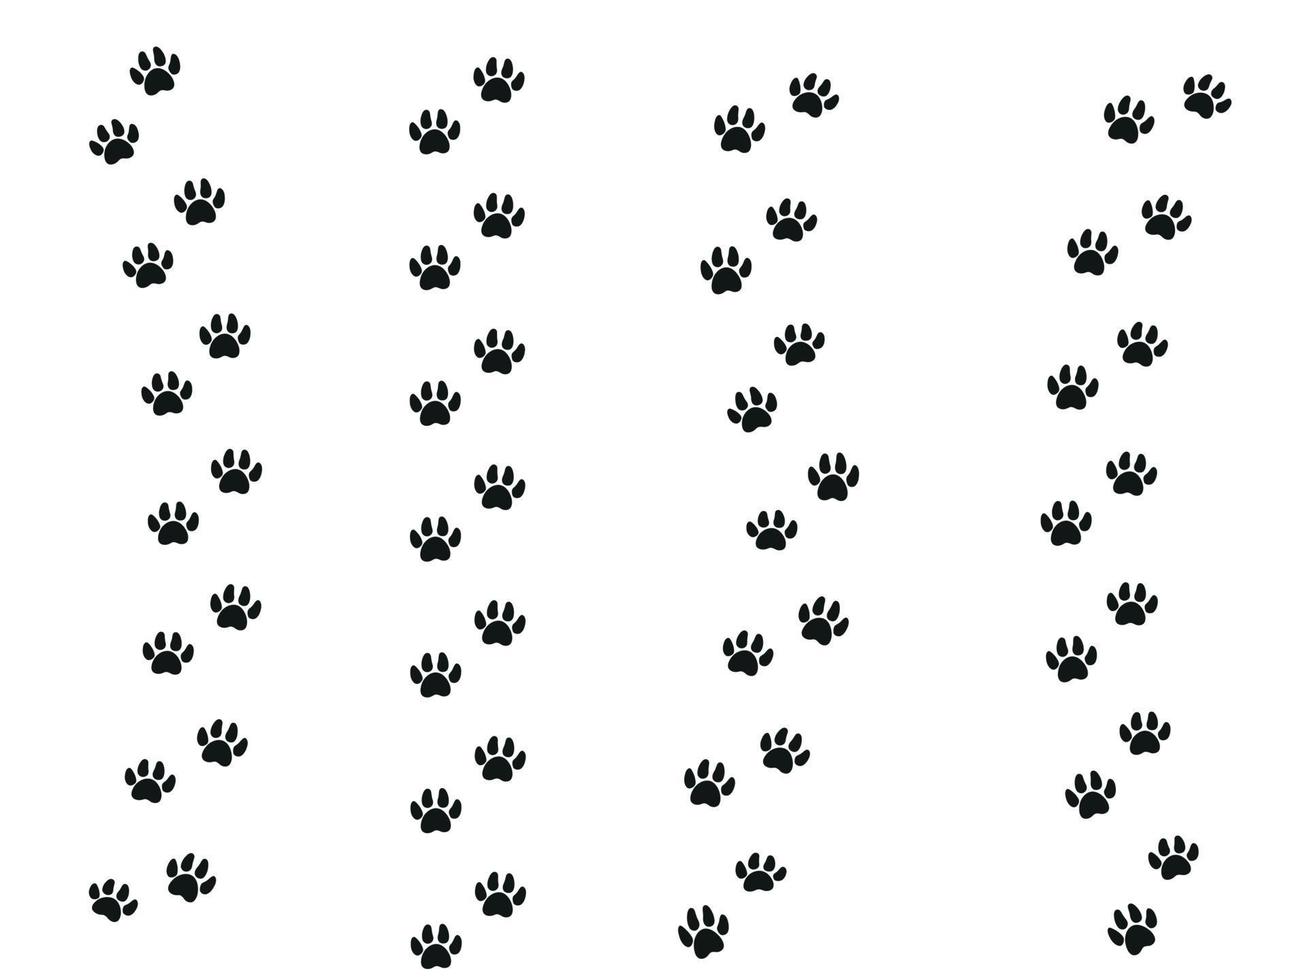 Cat feet tracks. Animals paws and sillhouetts. Vector illustration